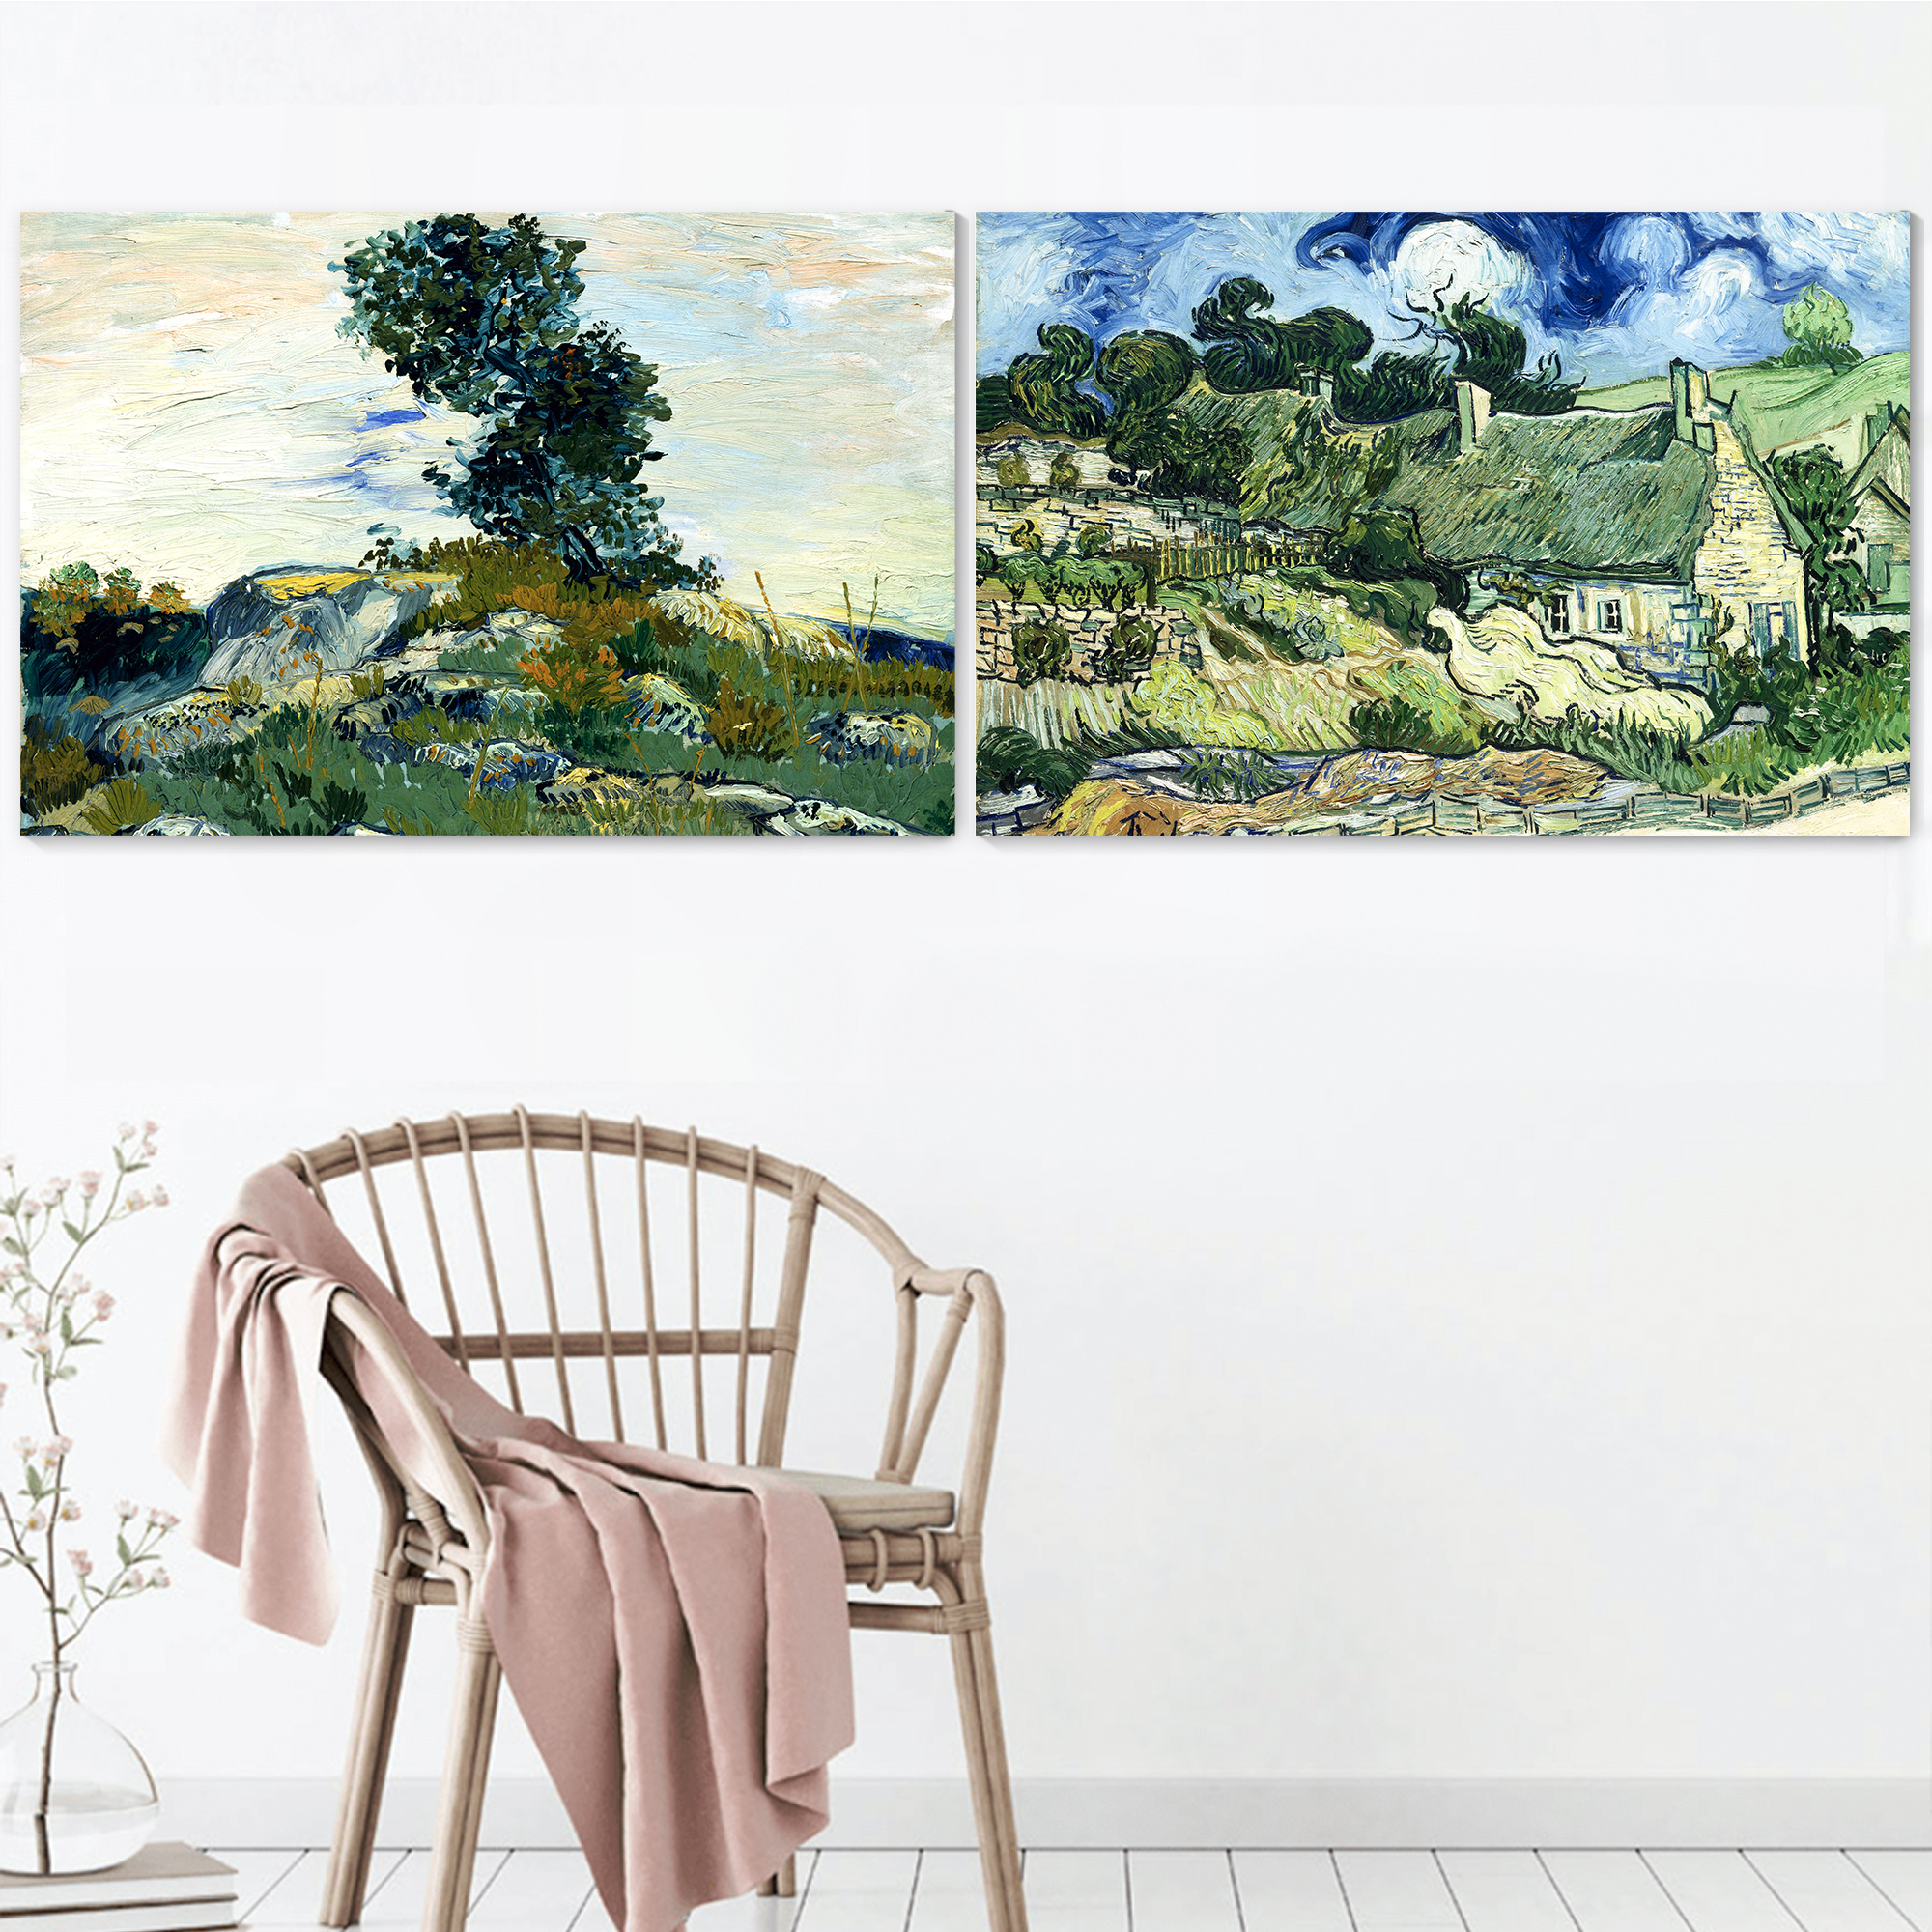 Wall26 - The Rocks/Thatched Cottages at Cordeville by Vincent Van Gogh - Oil Painting Reproduction in Set of 2 | Canvas Prints Wall Art, Ready to Hang - 16